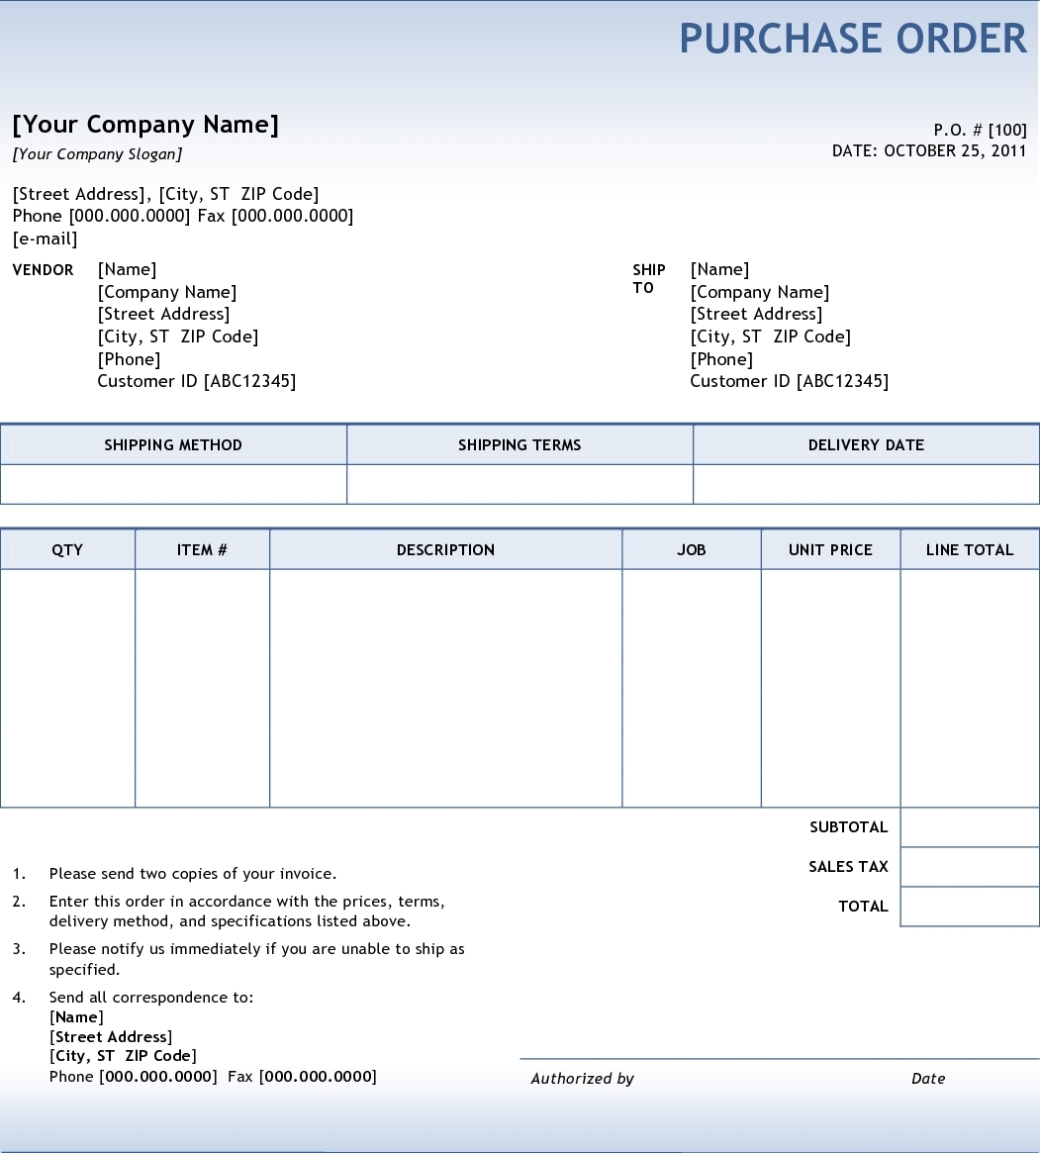 Purchase Order Invoice * Invoice Template Ideas In Sales Invoice Terms And Conditions Template